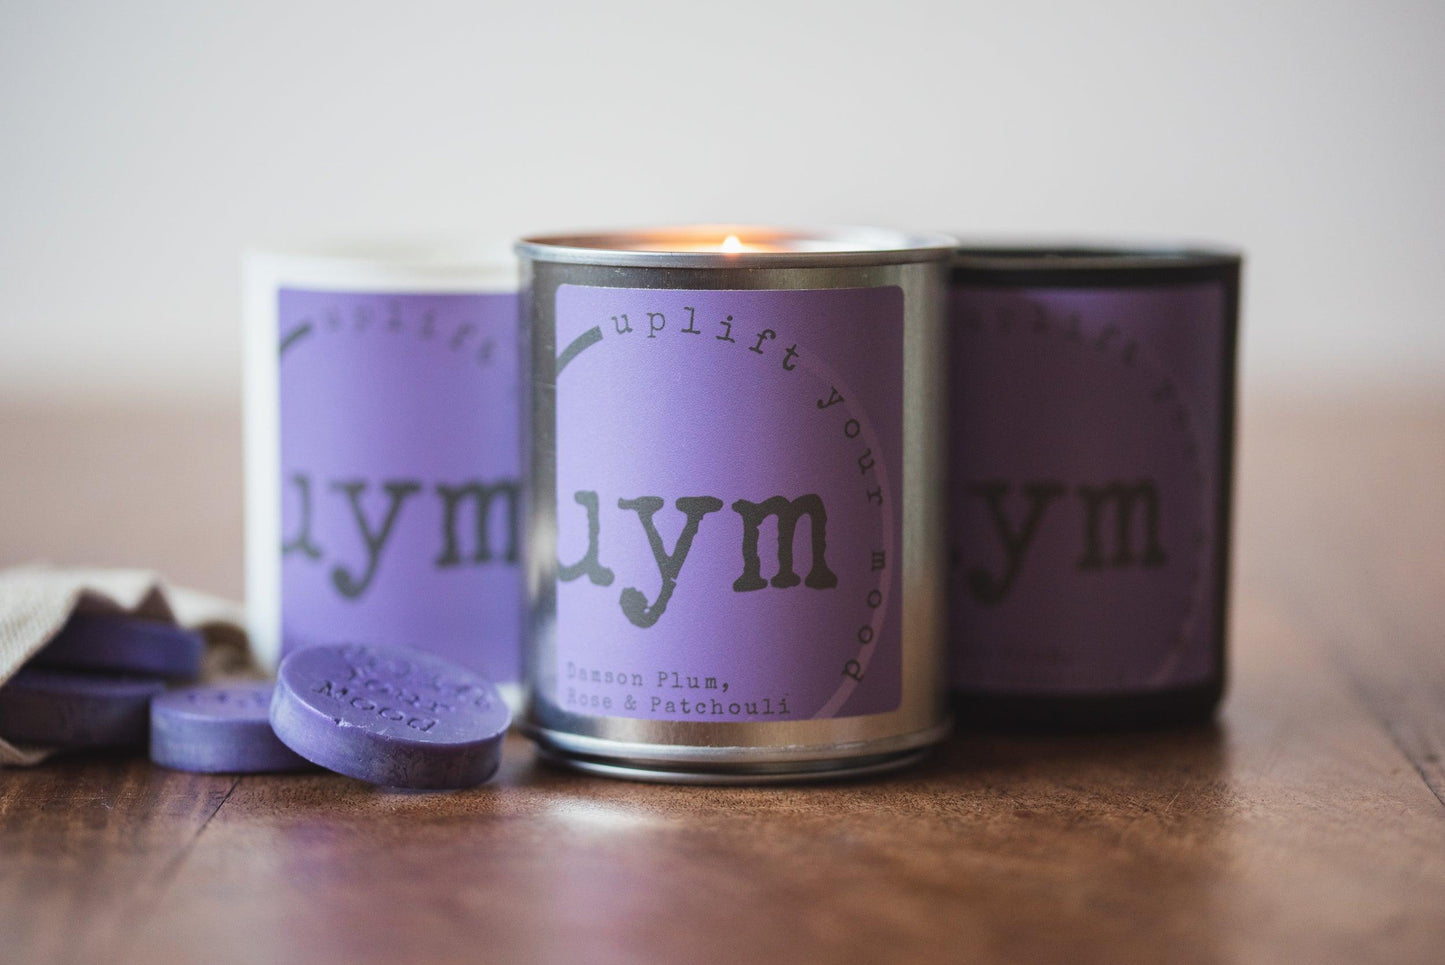 Damson Plum, Rose & Patchouli Candles, highly sceted natural wax, organic cotton wick, various container to choose from, purle label. Uplift Your Mood Scents